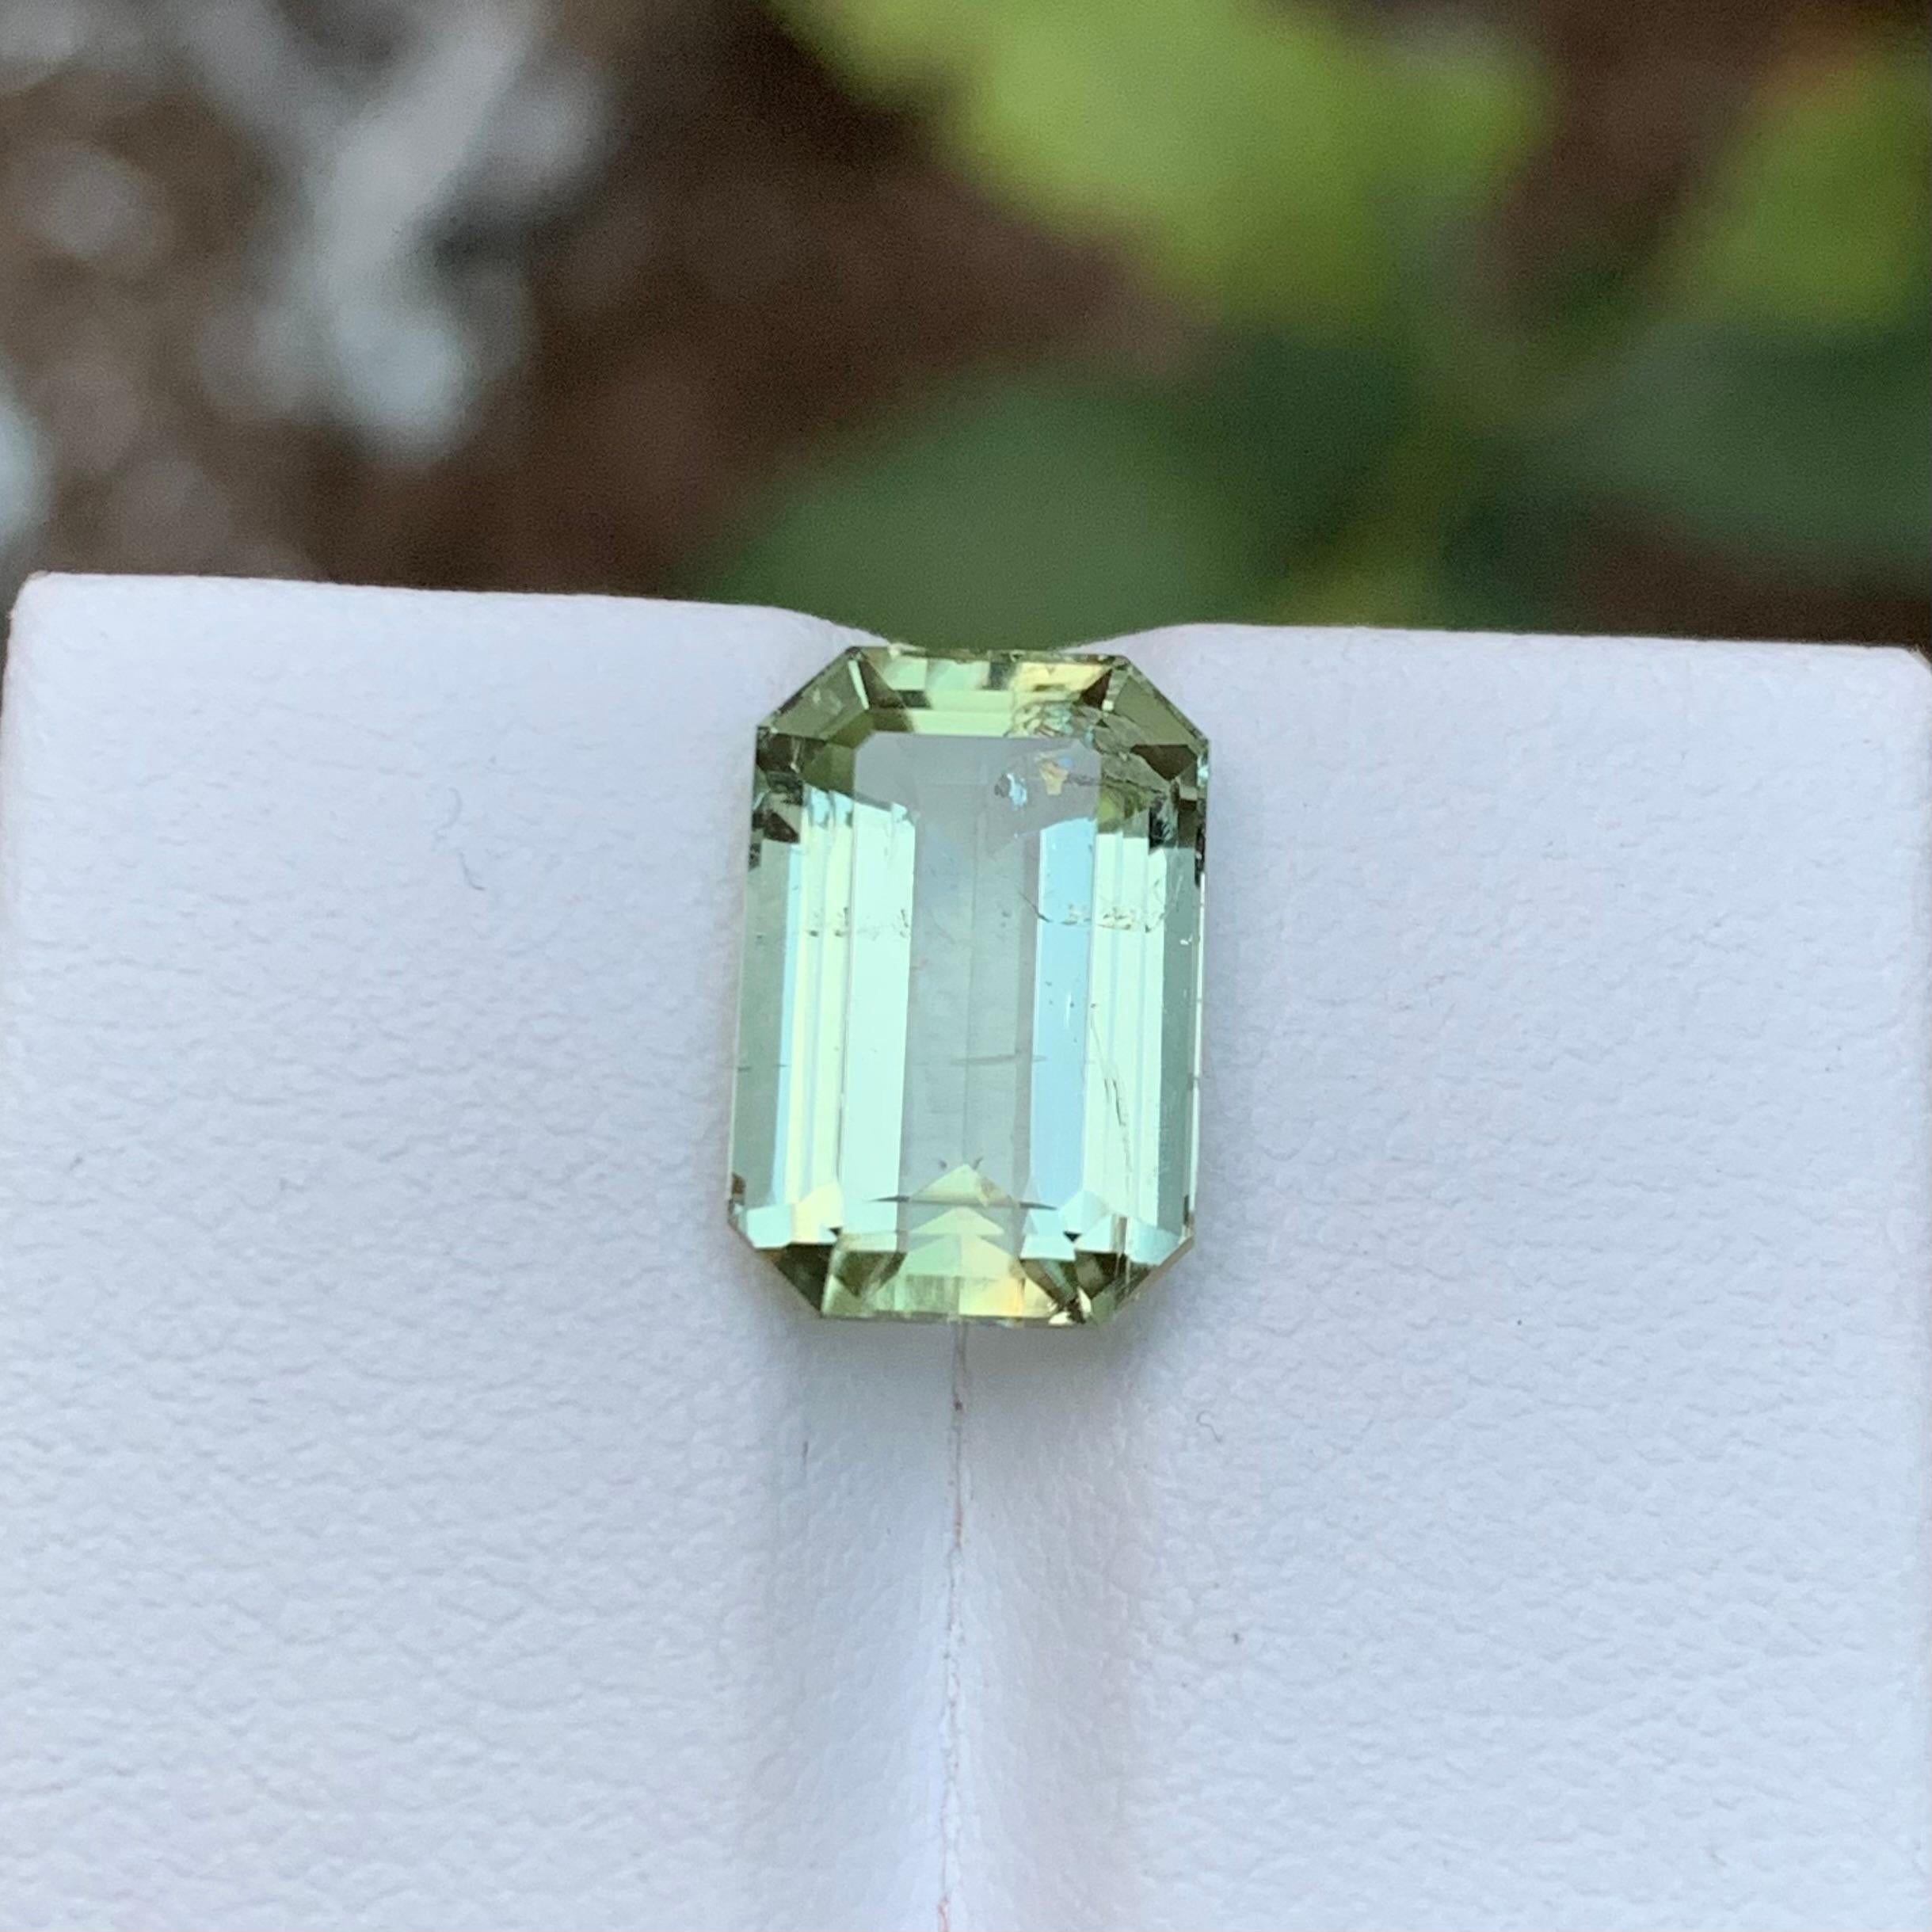 Rare Pastel Green Natural Tourmaline Gemstone, 5.05 Ct Emerald Cut-Ring/Jewelry For Sale 4